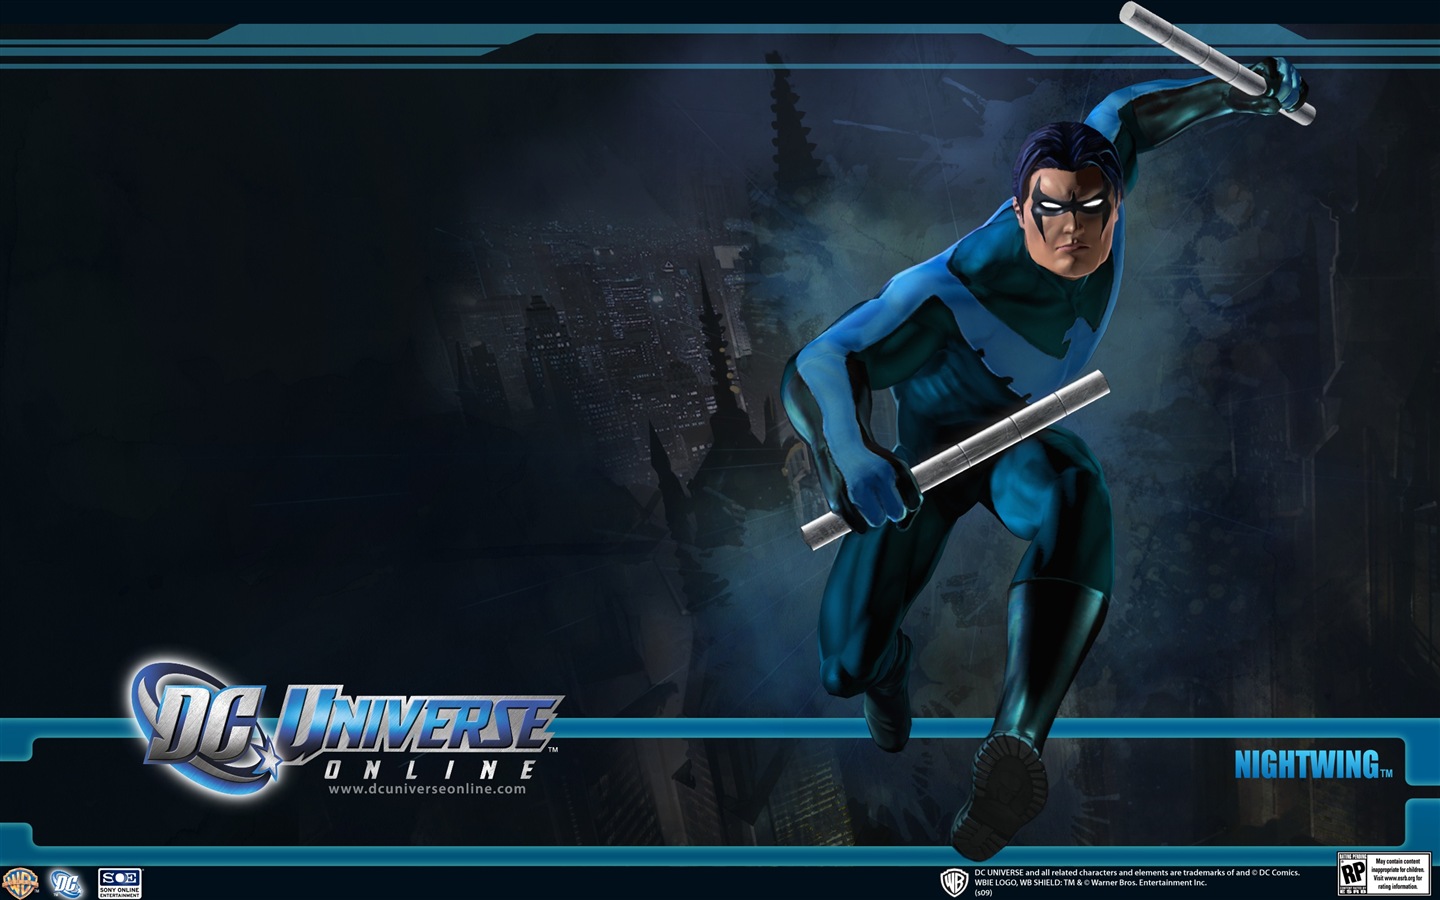 DC Universe Online HD game wallpapers #22 - 1440x900